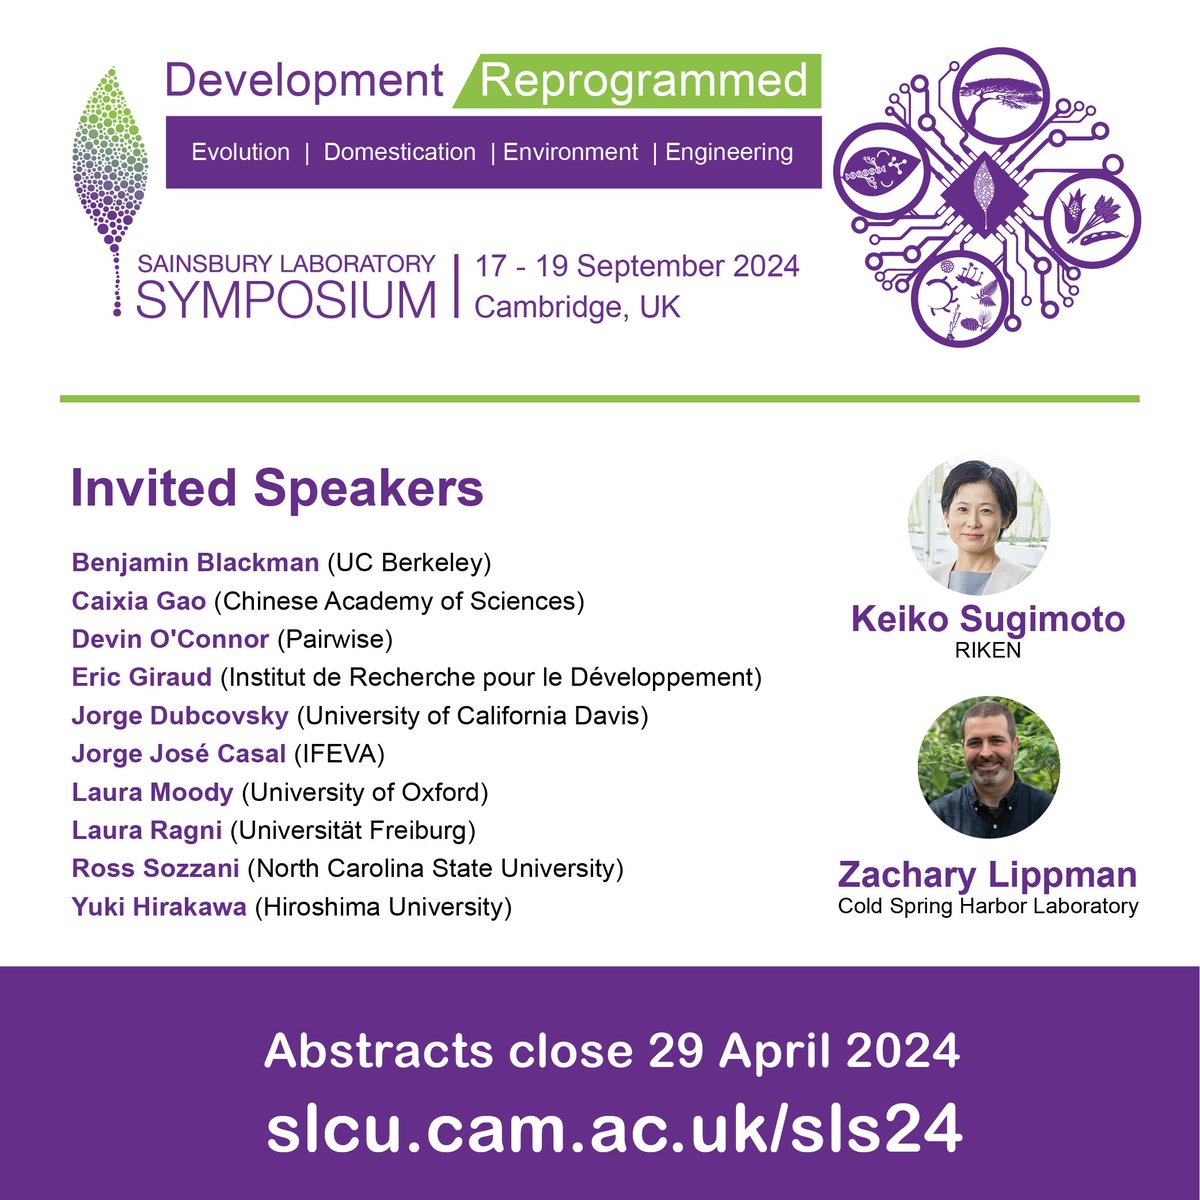 LAST 2 DAYS to submit your abstract to present at the Sainsbury Laboratory Symposium! Theme: Development Reprogrammed: Evolution-Domestication-Environment-Engineering 🗓️17-19 September 2024 | Cambridge UK slcu.cam.ac.uk/sls24